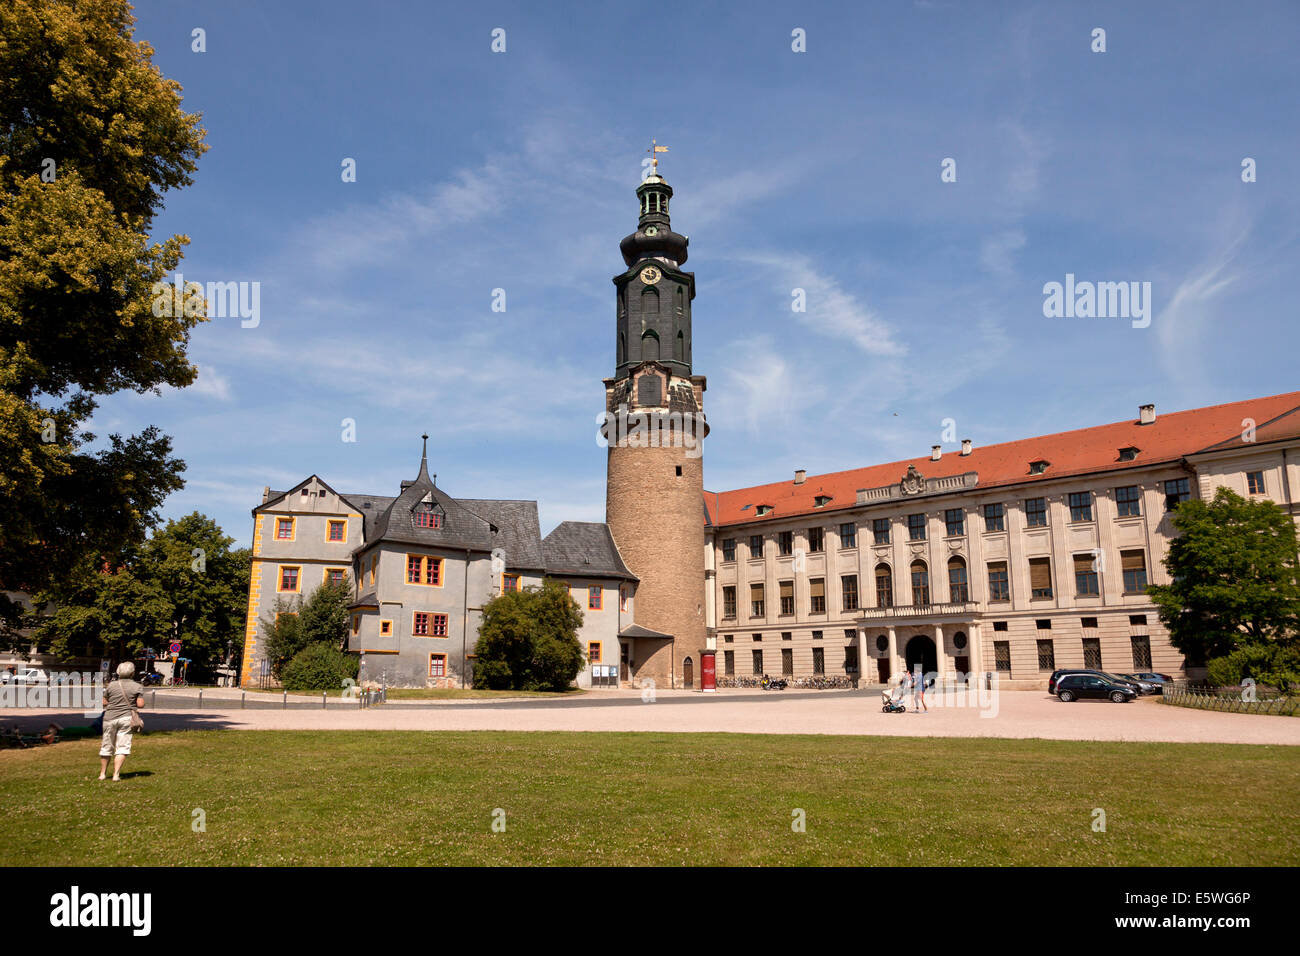 palace Stadtschloss or Schloss Weimar in Weimar, Thuringia, Germany, Europe Stock Photo